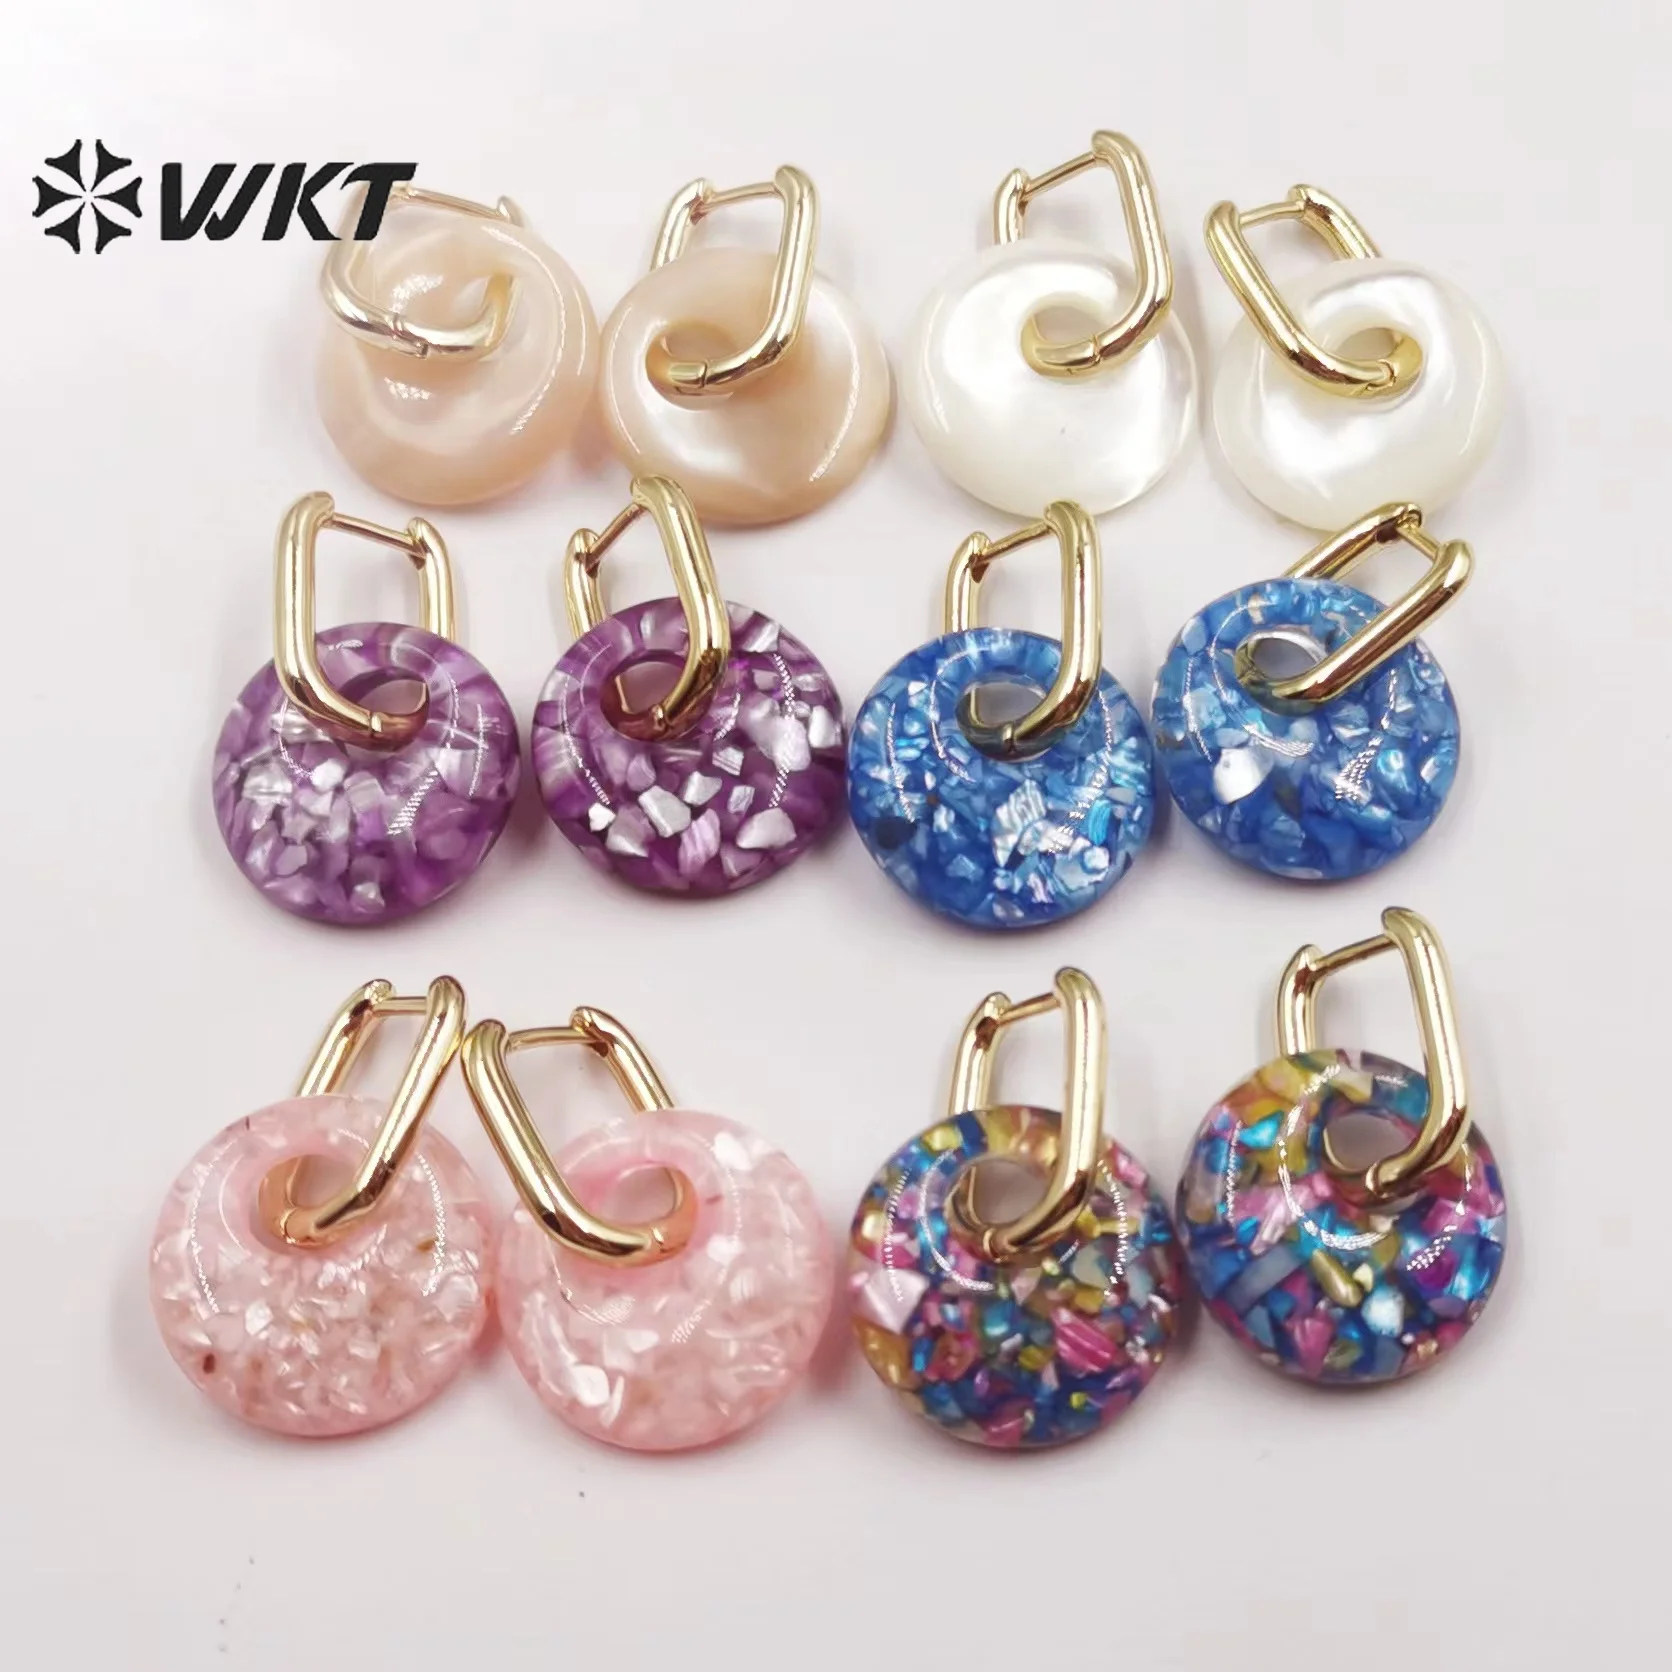 

WT-MPE074 WKT 2022 Ellipse Shape Natural Tiny Shell With Enamel Colorful Style Earrings ForLady Party Jewelry Gift Trend